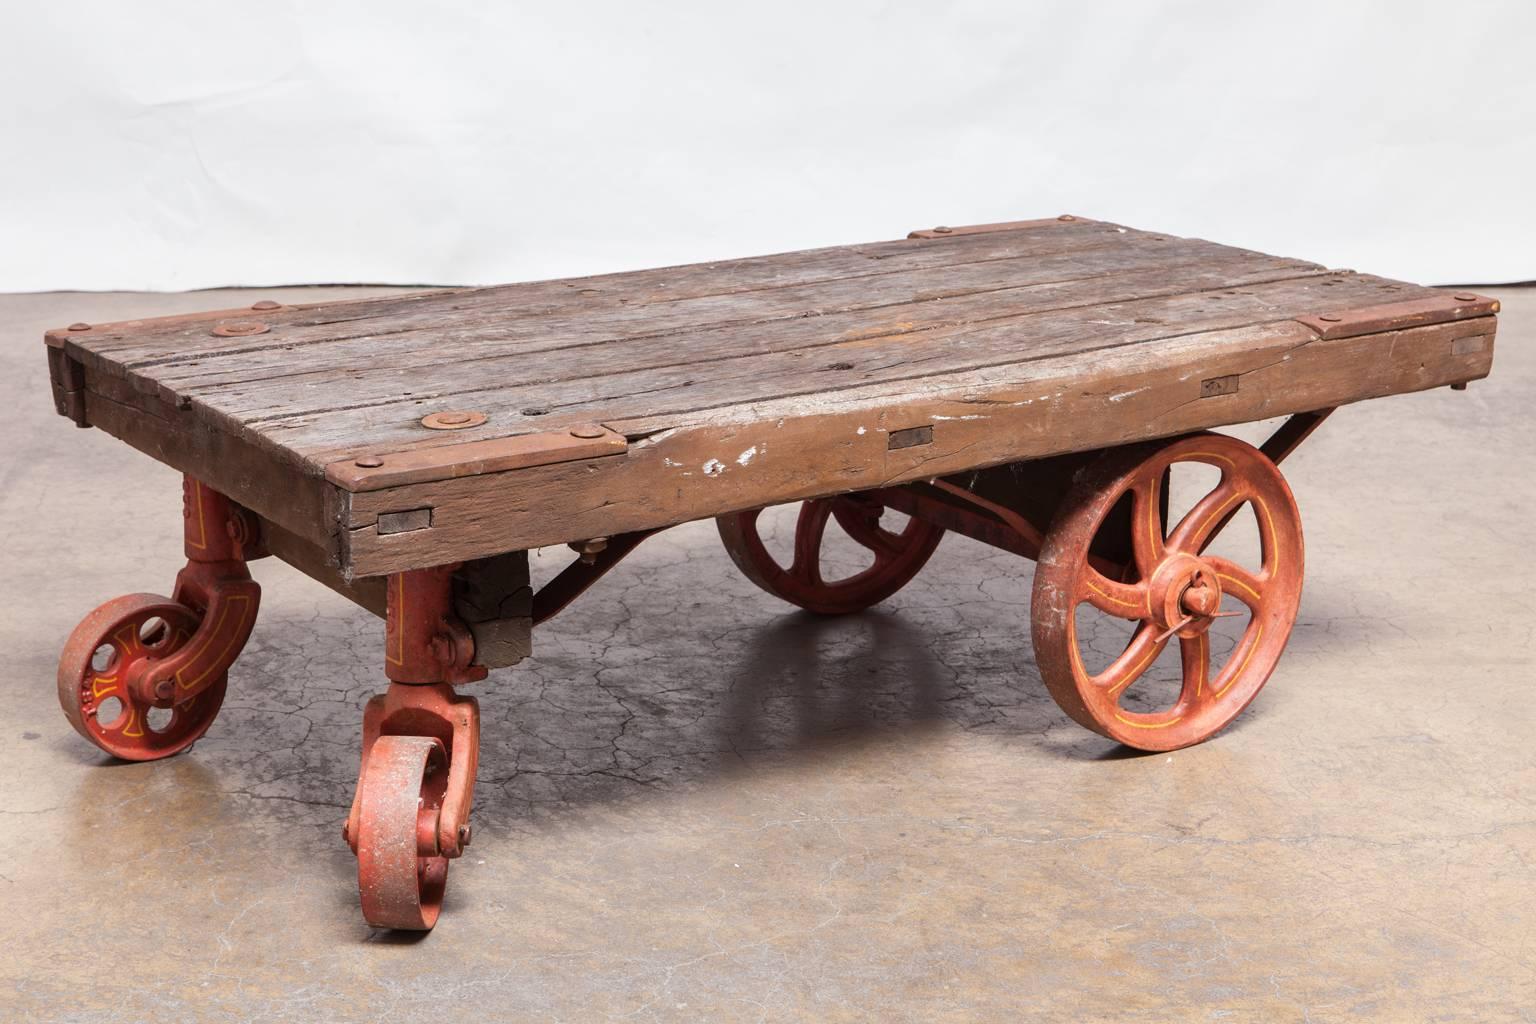 Charming Industrial rolling trolley cart with a wood plank top and featuring four cast iron wheels finished in red. Constructed with mortise and tenon joinery with heavy metal hardware. Level top makes it a great candidate for a coffee table.